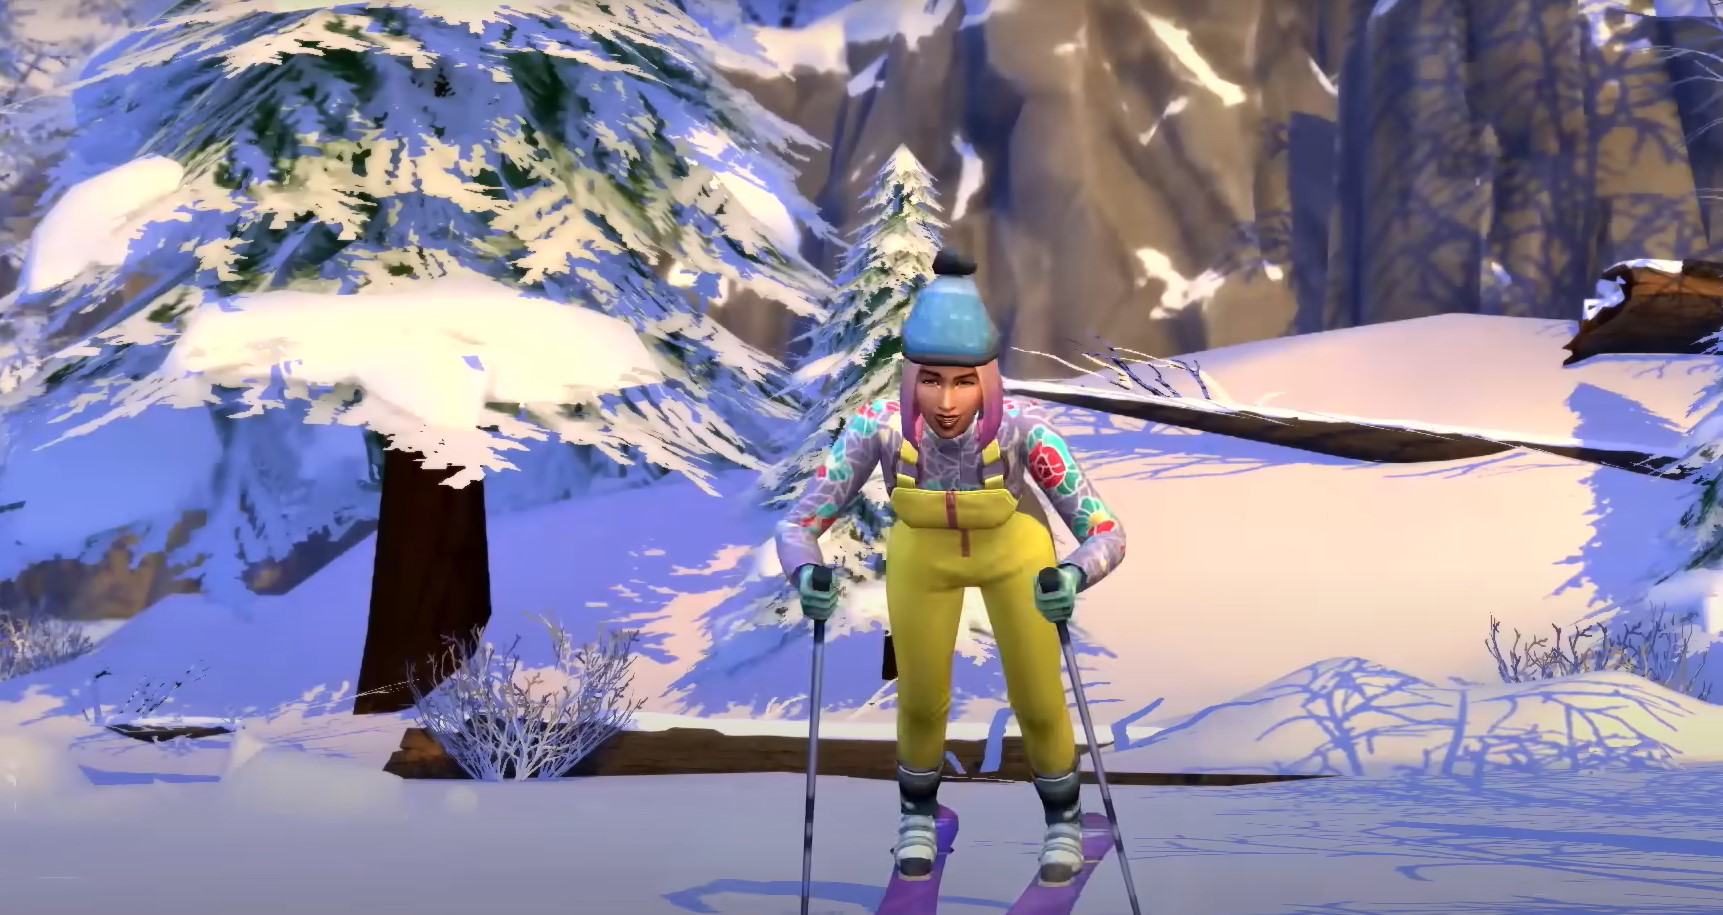 How to change the season in Sims 4 - character skiing